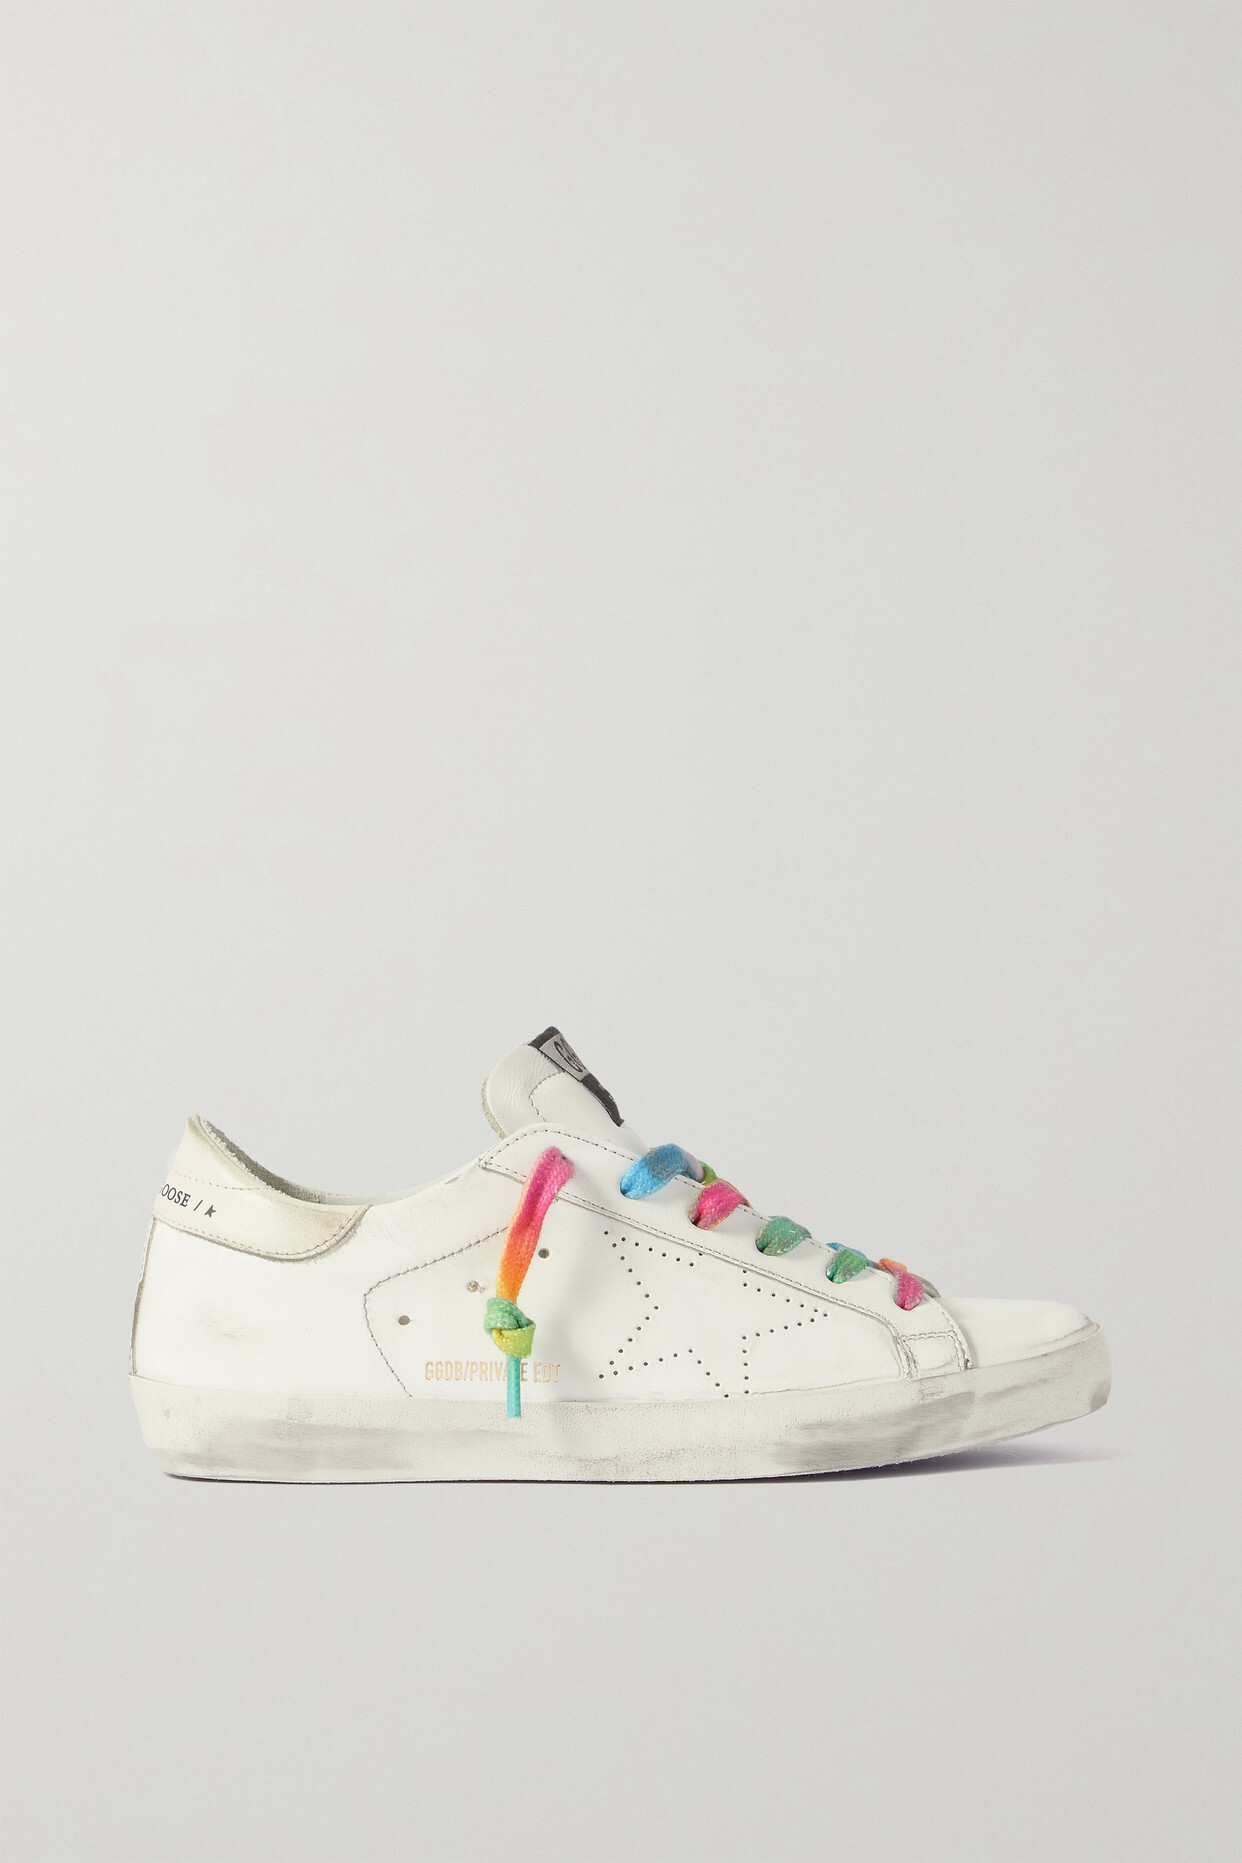 Golden Goose - Superstar Perforated Distressed Leather Sneakers - White